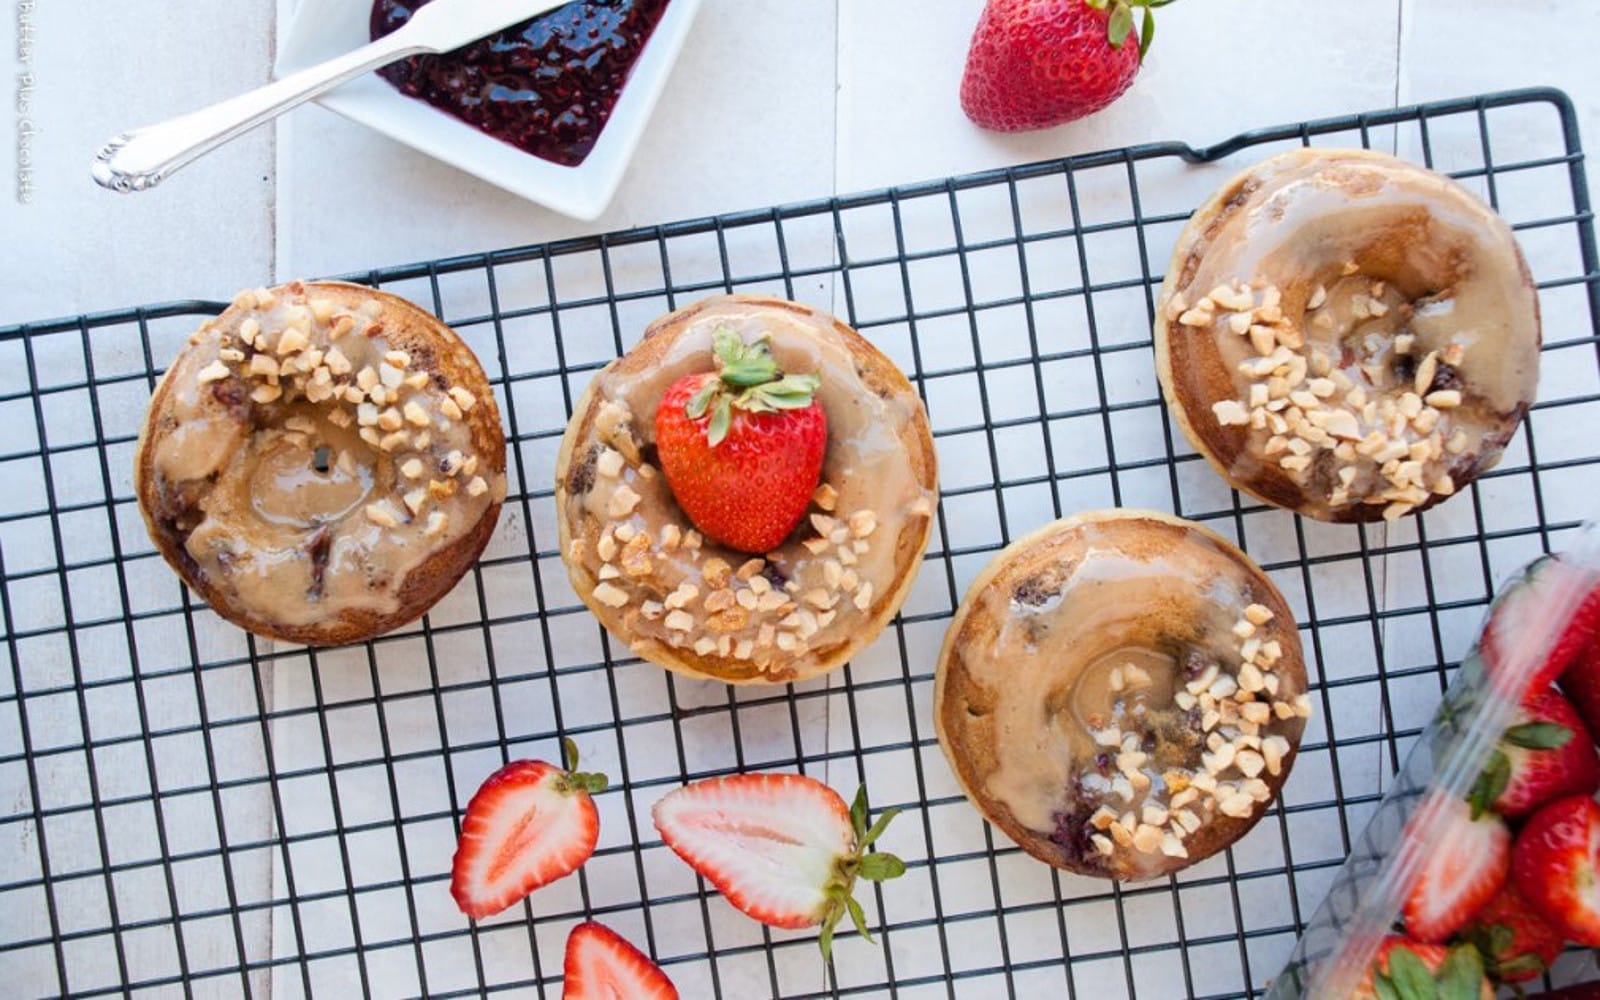 Vegan Healthier Peanut Butter and Jelly Baked Doughnuts with glaze, strawberries, and nuts to top